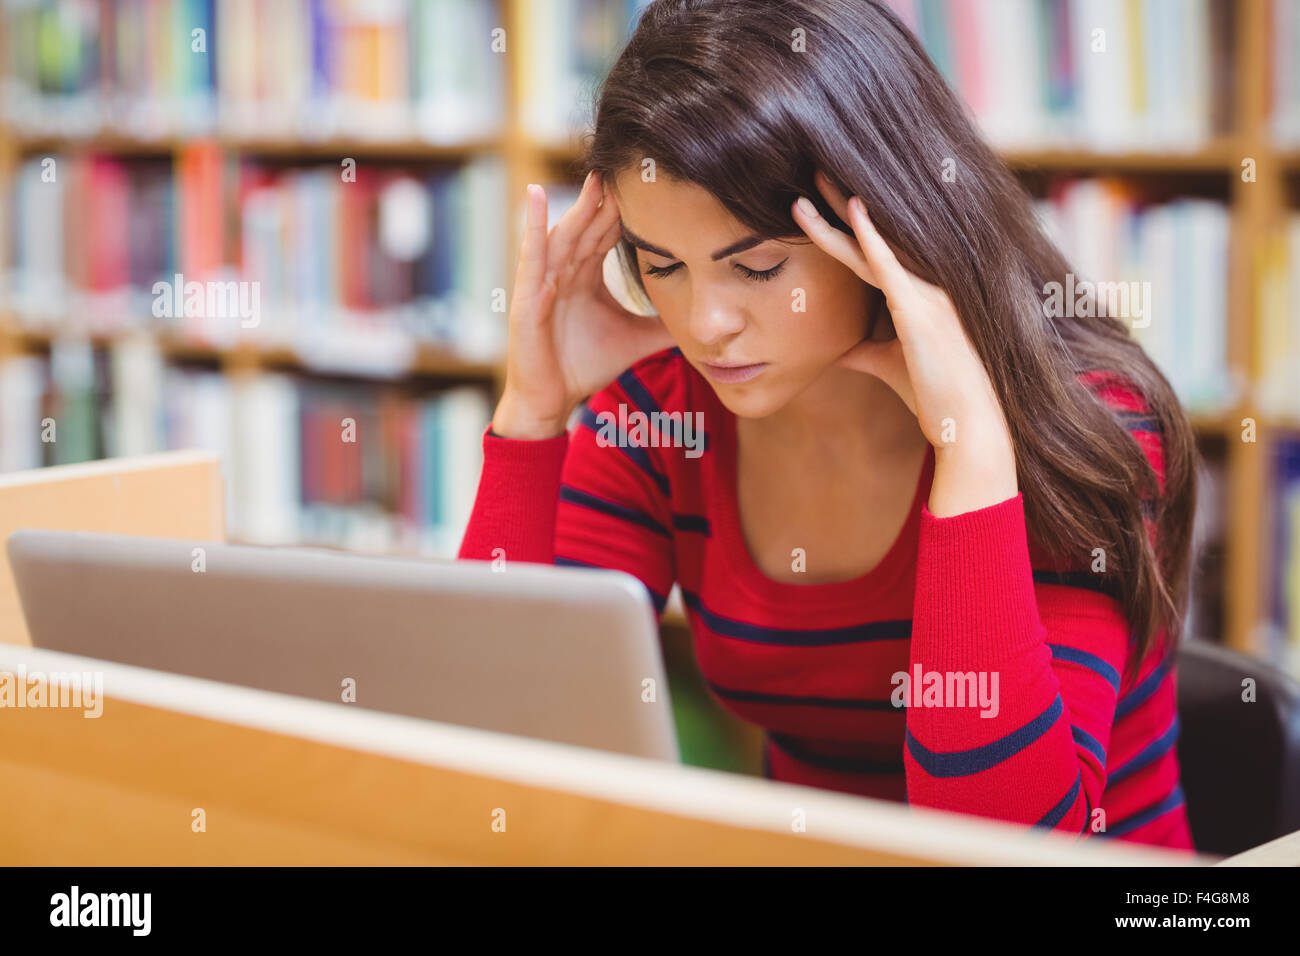 Worried student suffering from headache Stock Photo